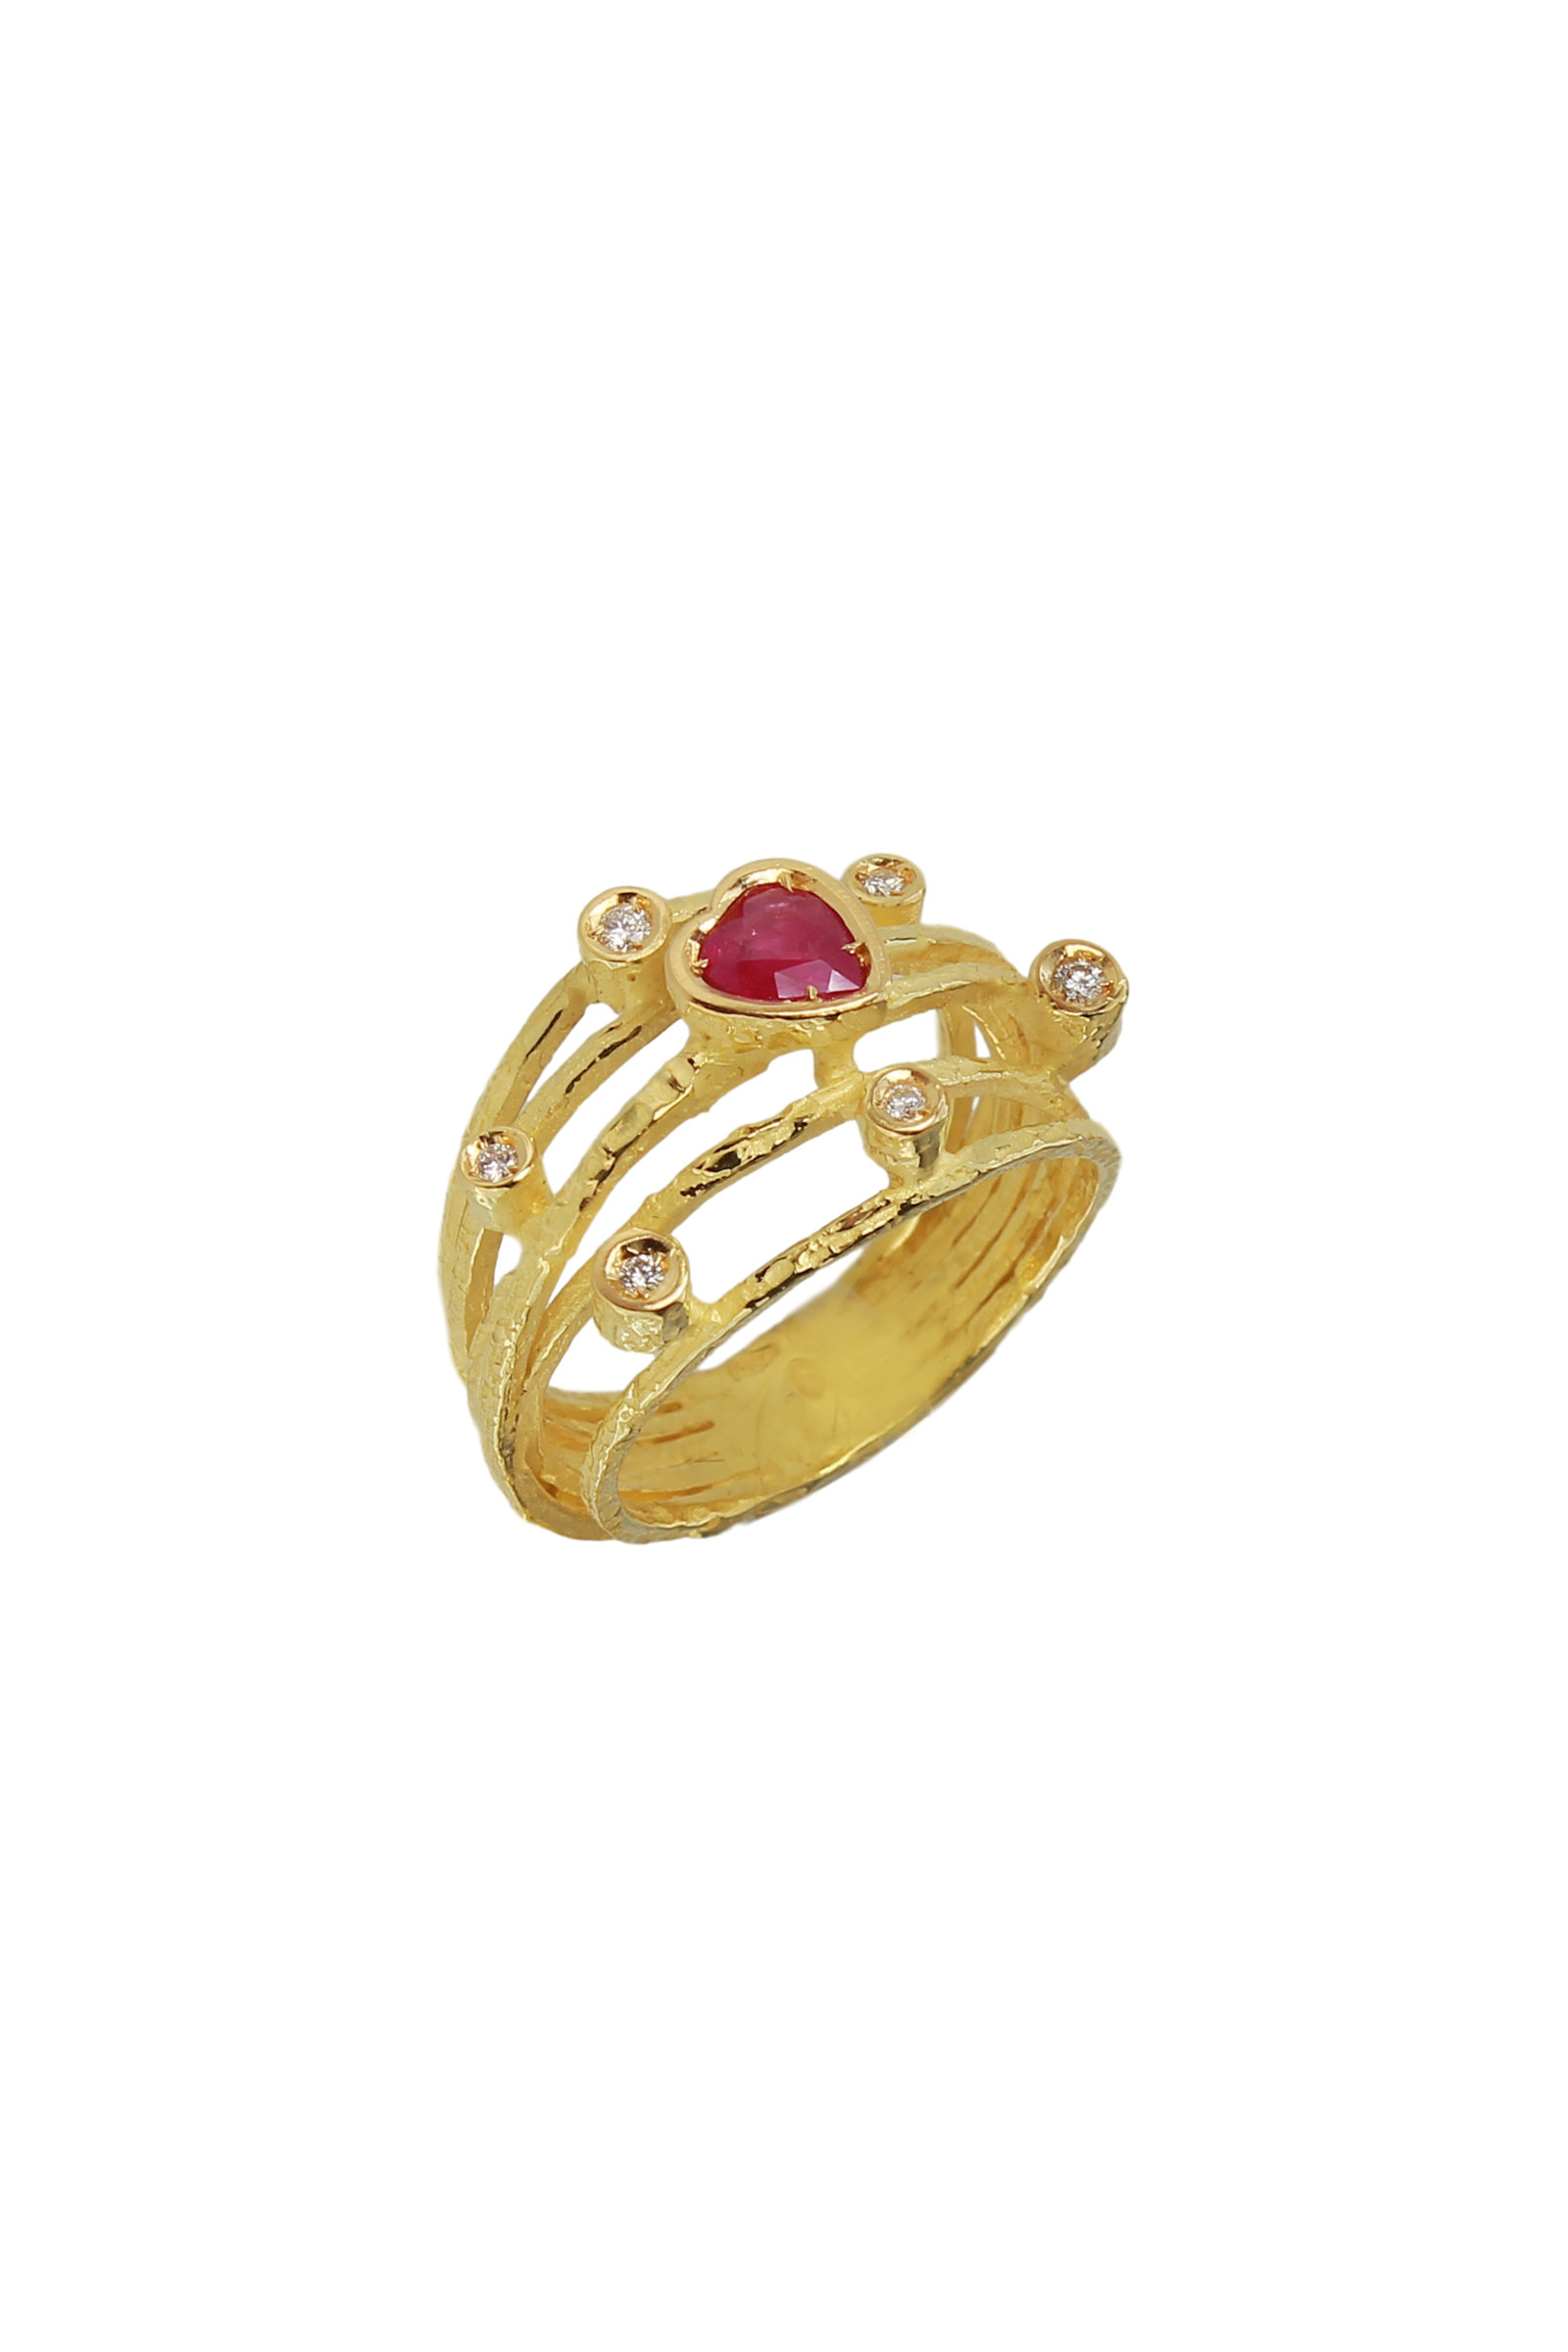 SE303DRU-18-Kt-Yellow-Gold-Wire-Ring-with-Diamonds-and-Heart-Ruby-1